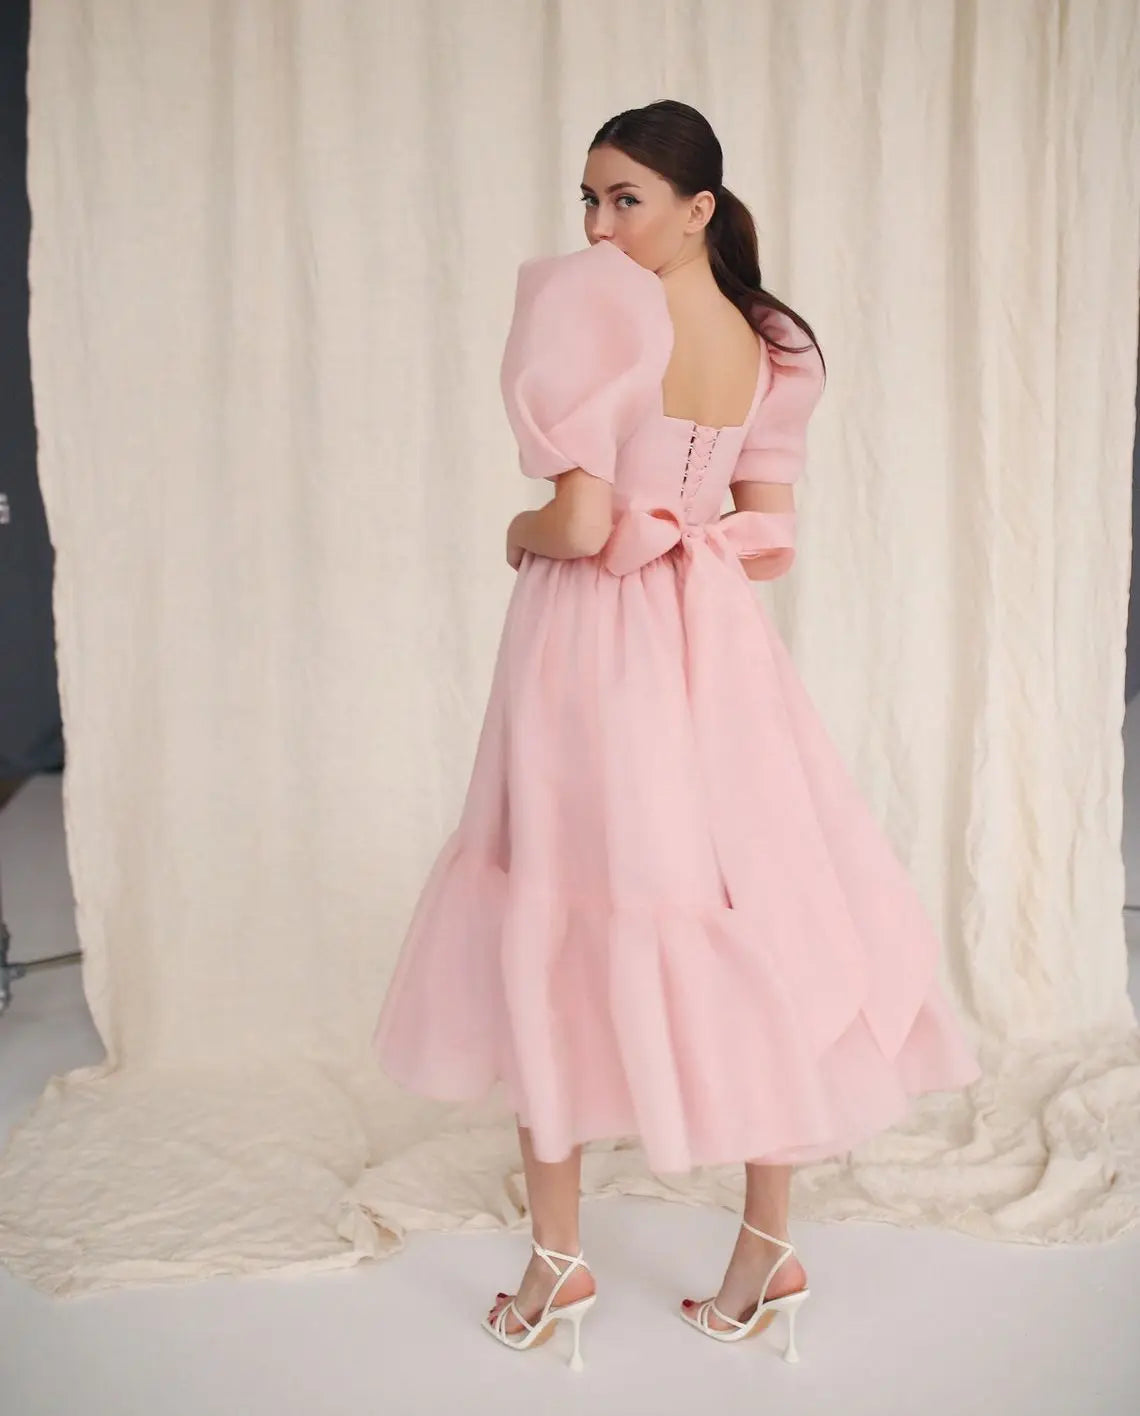 Pink Prom Dresses Organza Tea Length Puffy Short Sleeves Sqaure Neck A Line Simple Evening Engagement Party Gowns Occasion